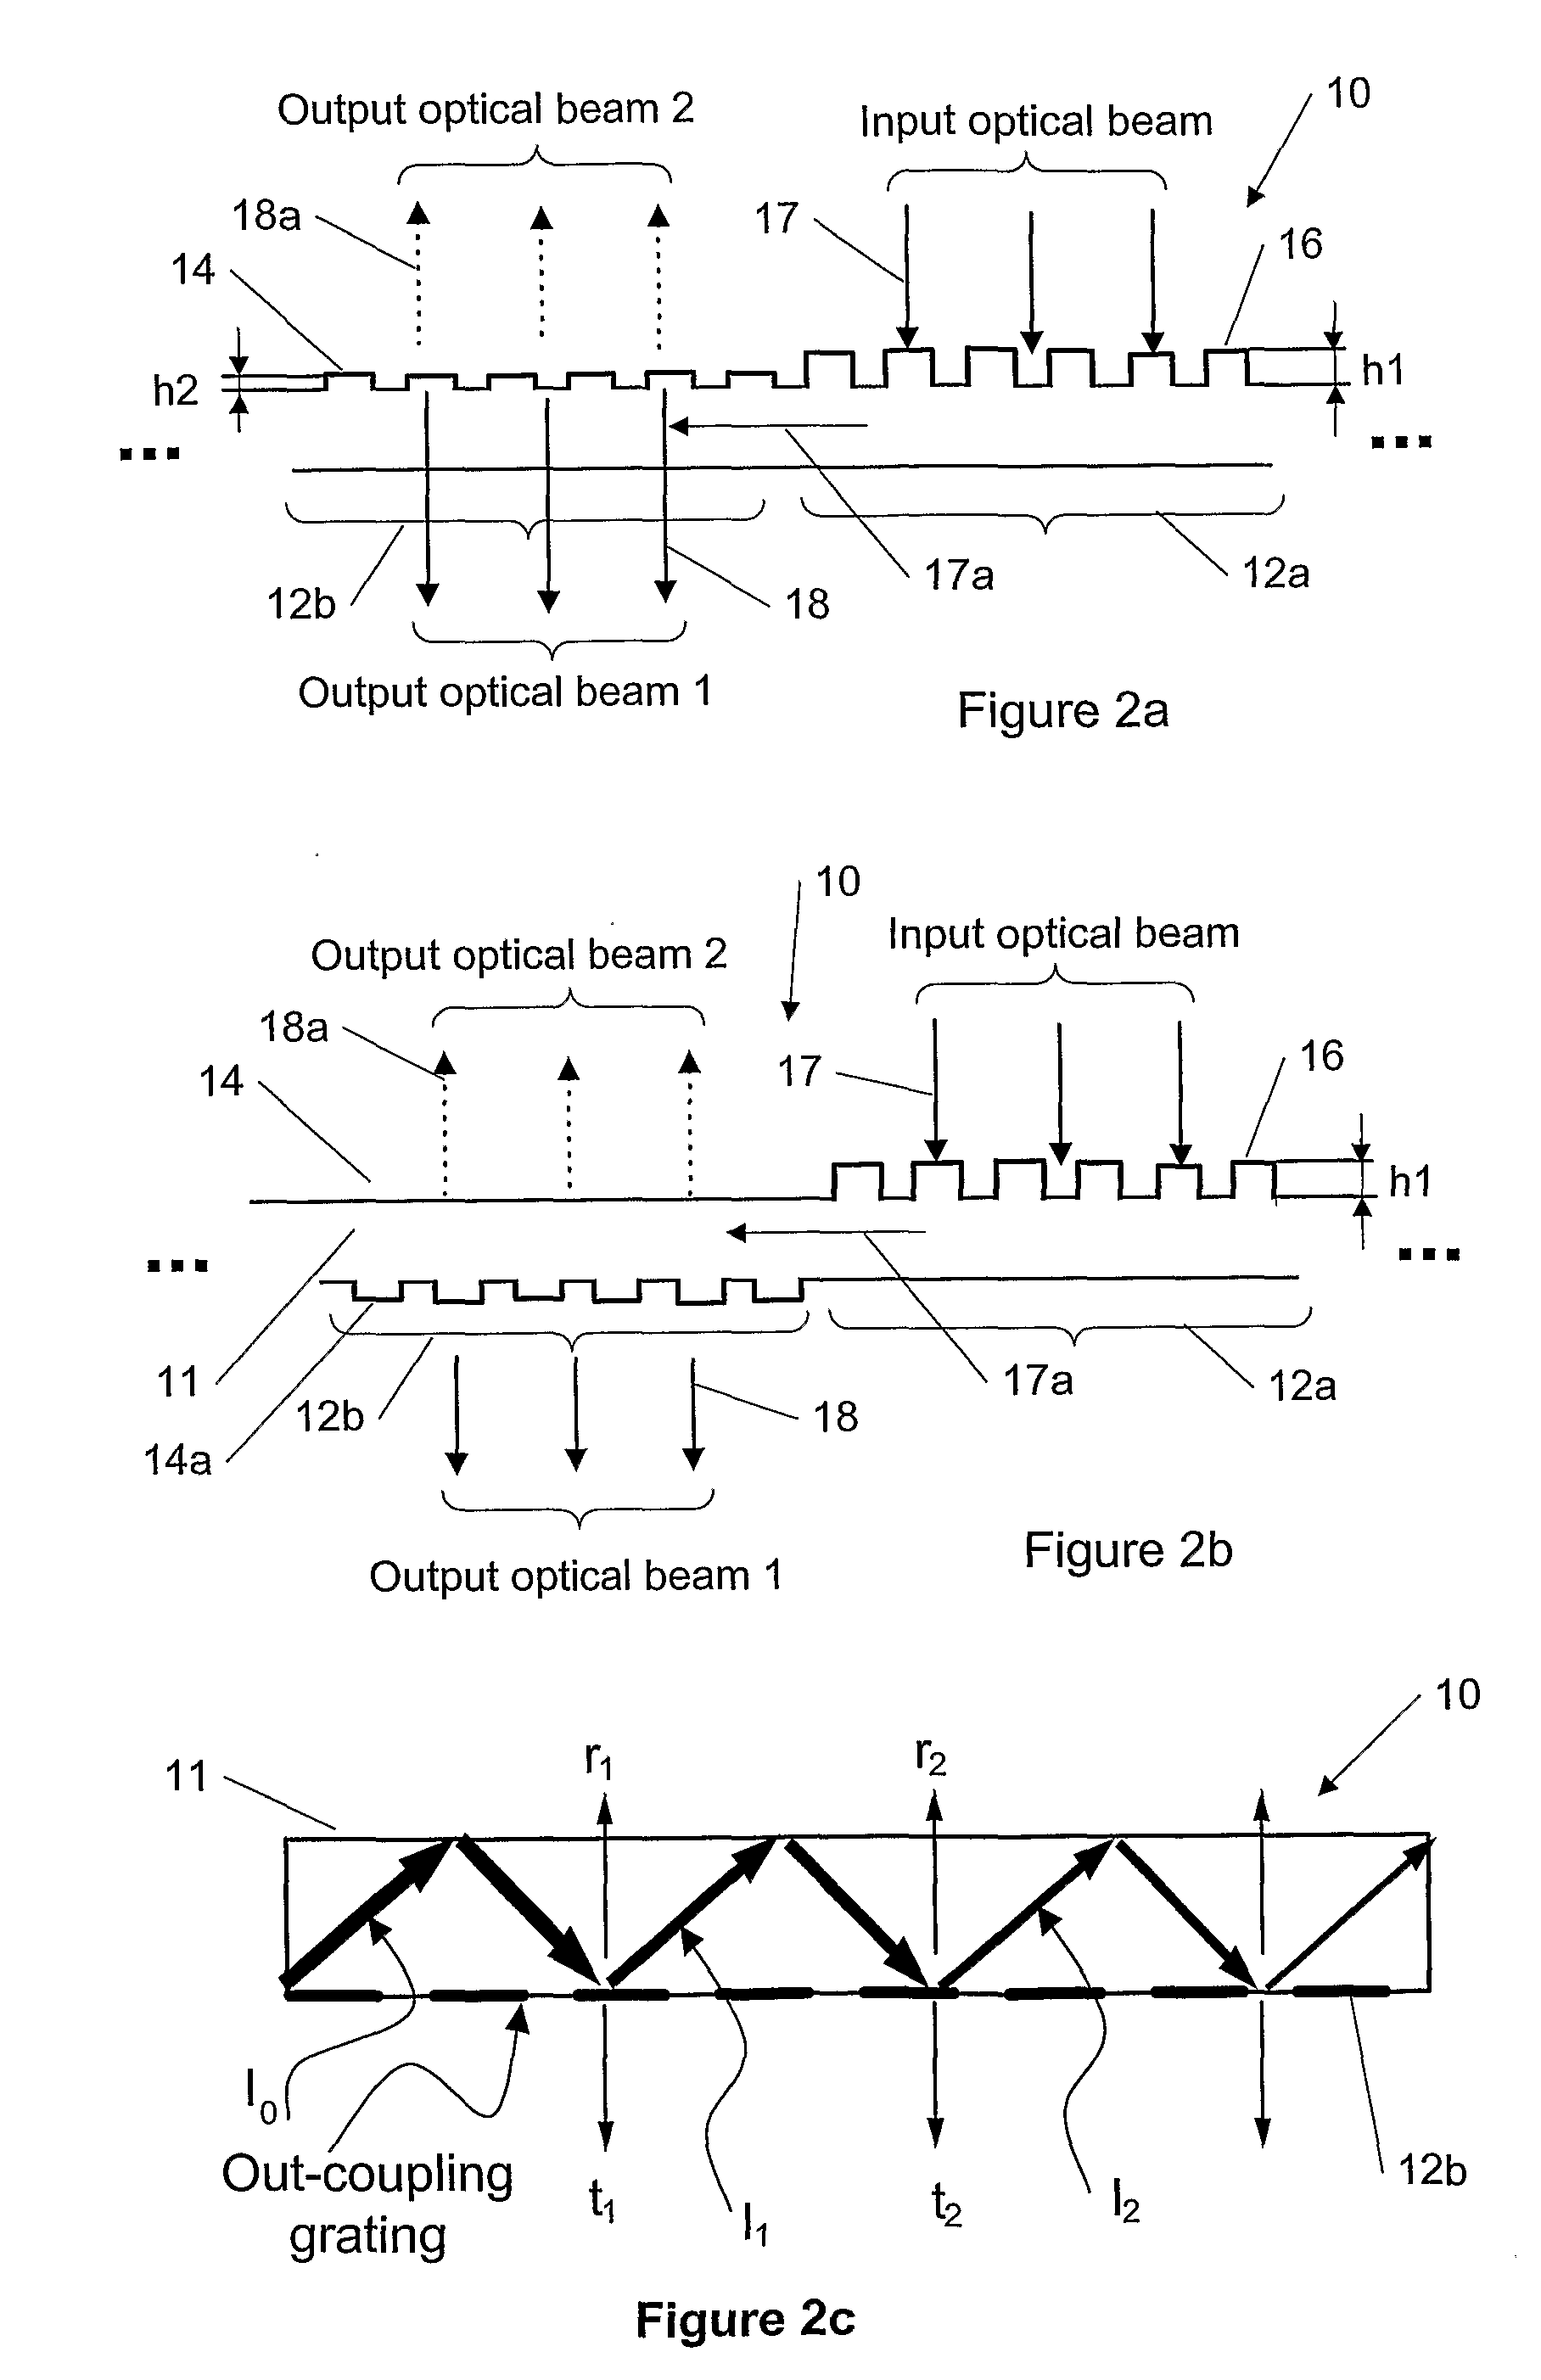 Beam expansion with three-dimensional diffractive elements